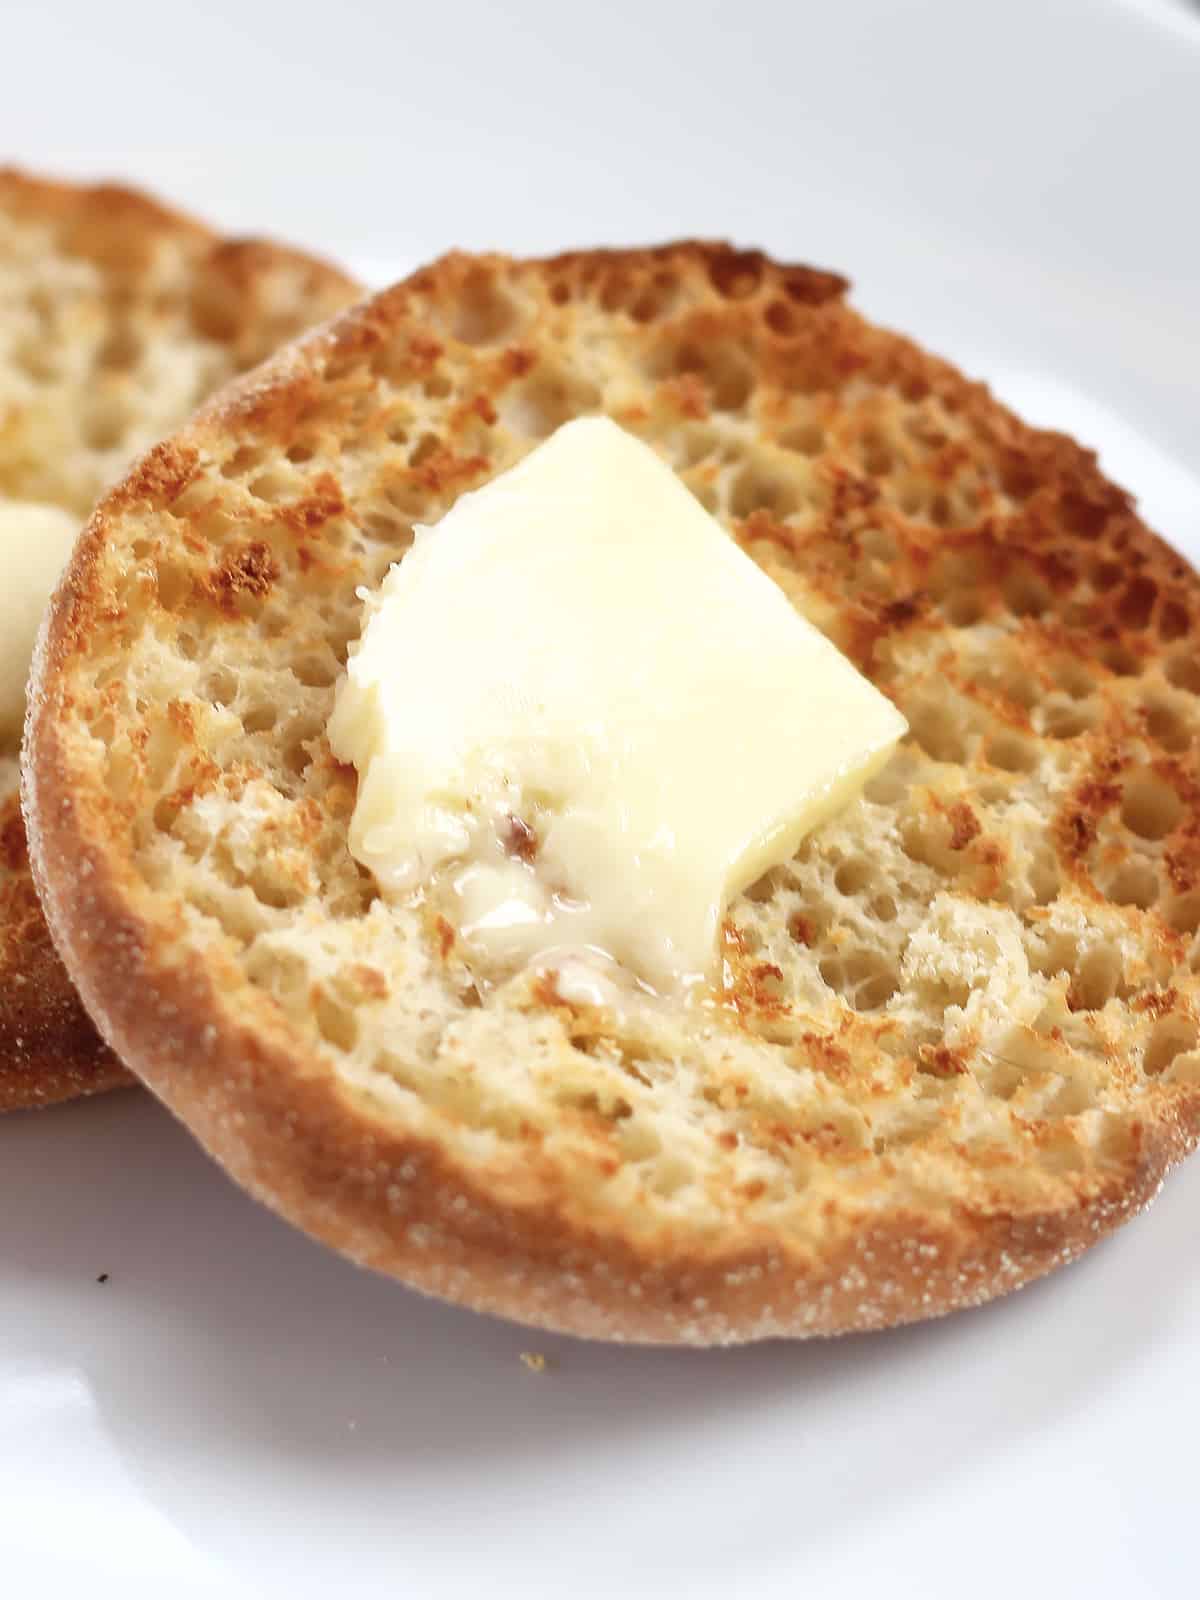 A toasted English muffin half with butter melting on it.